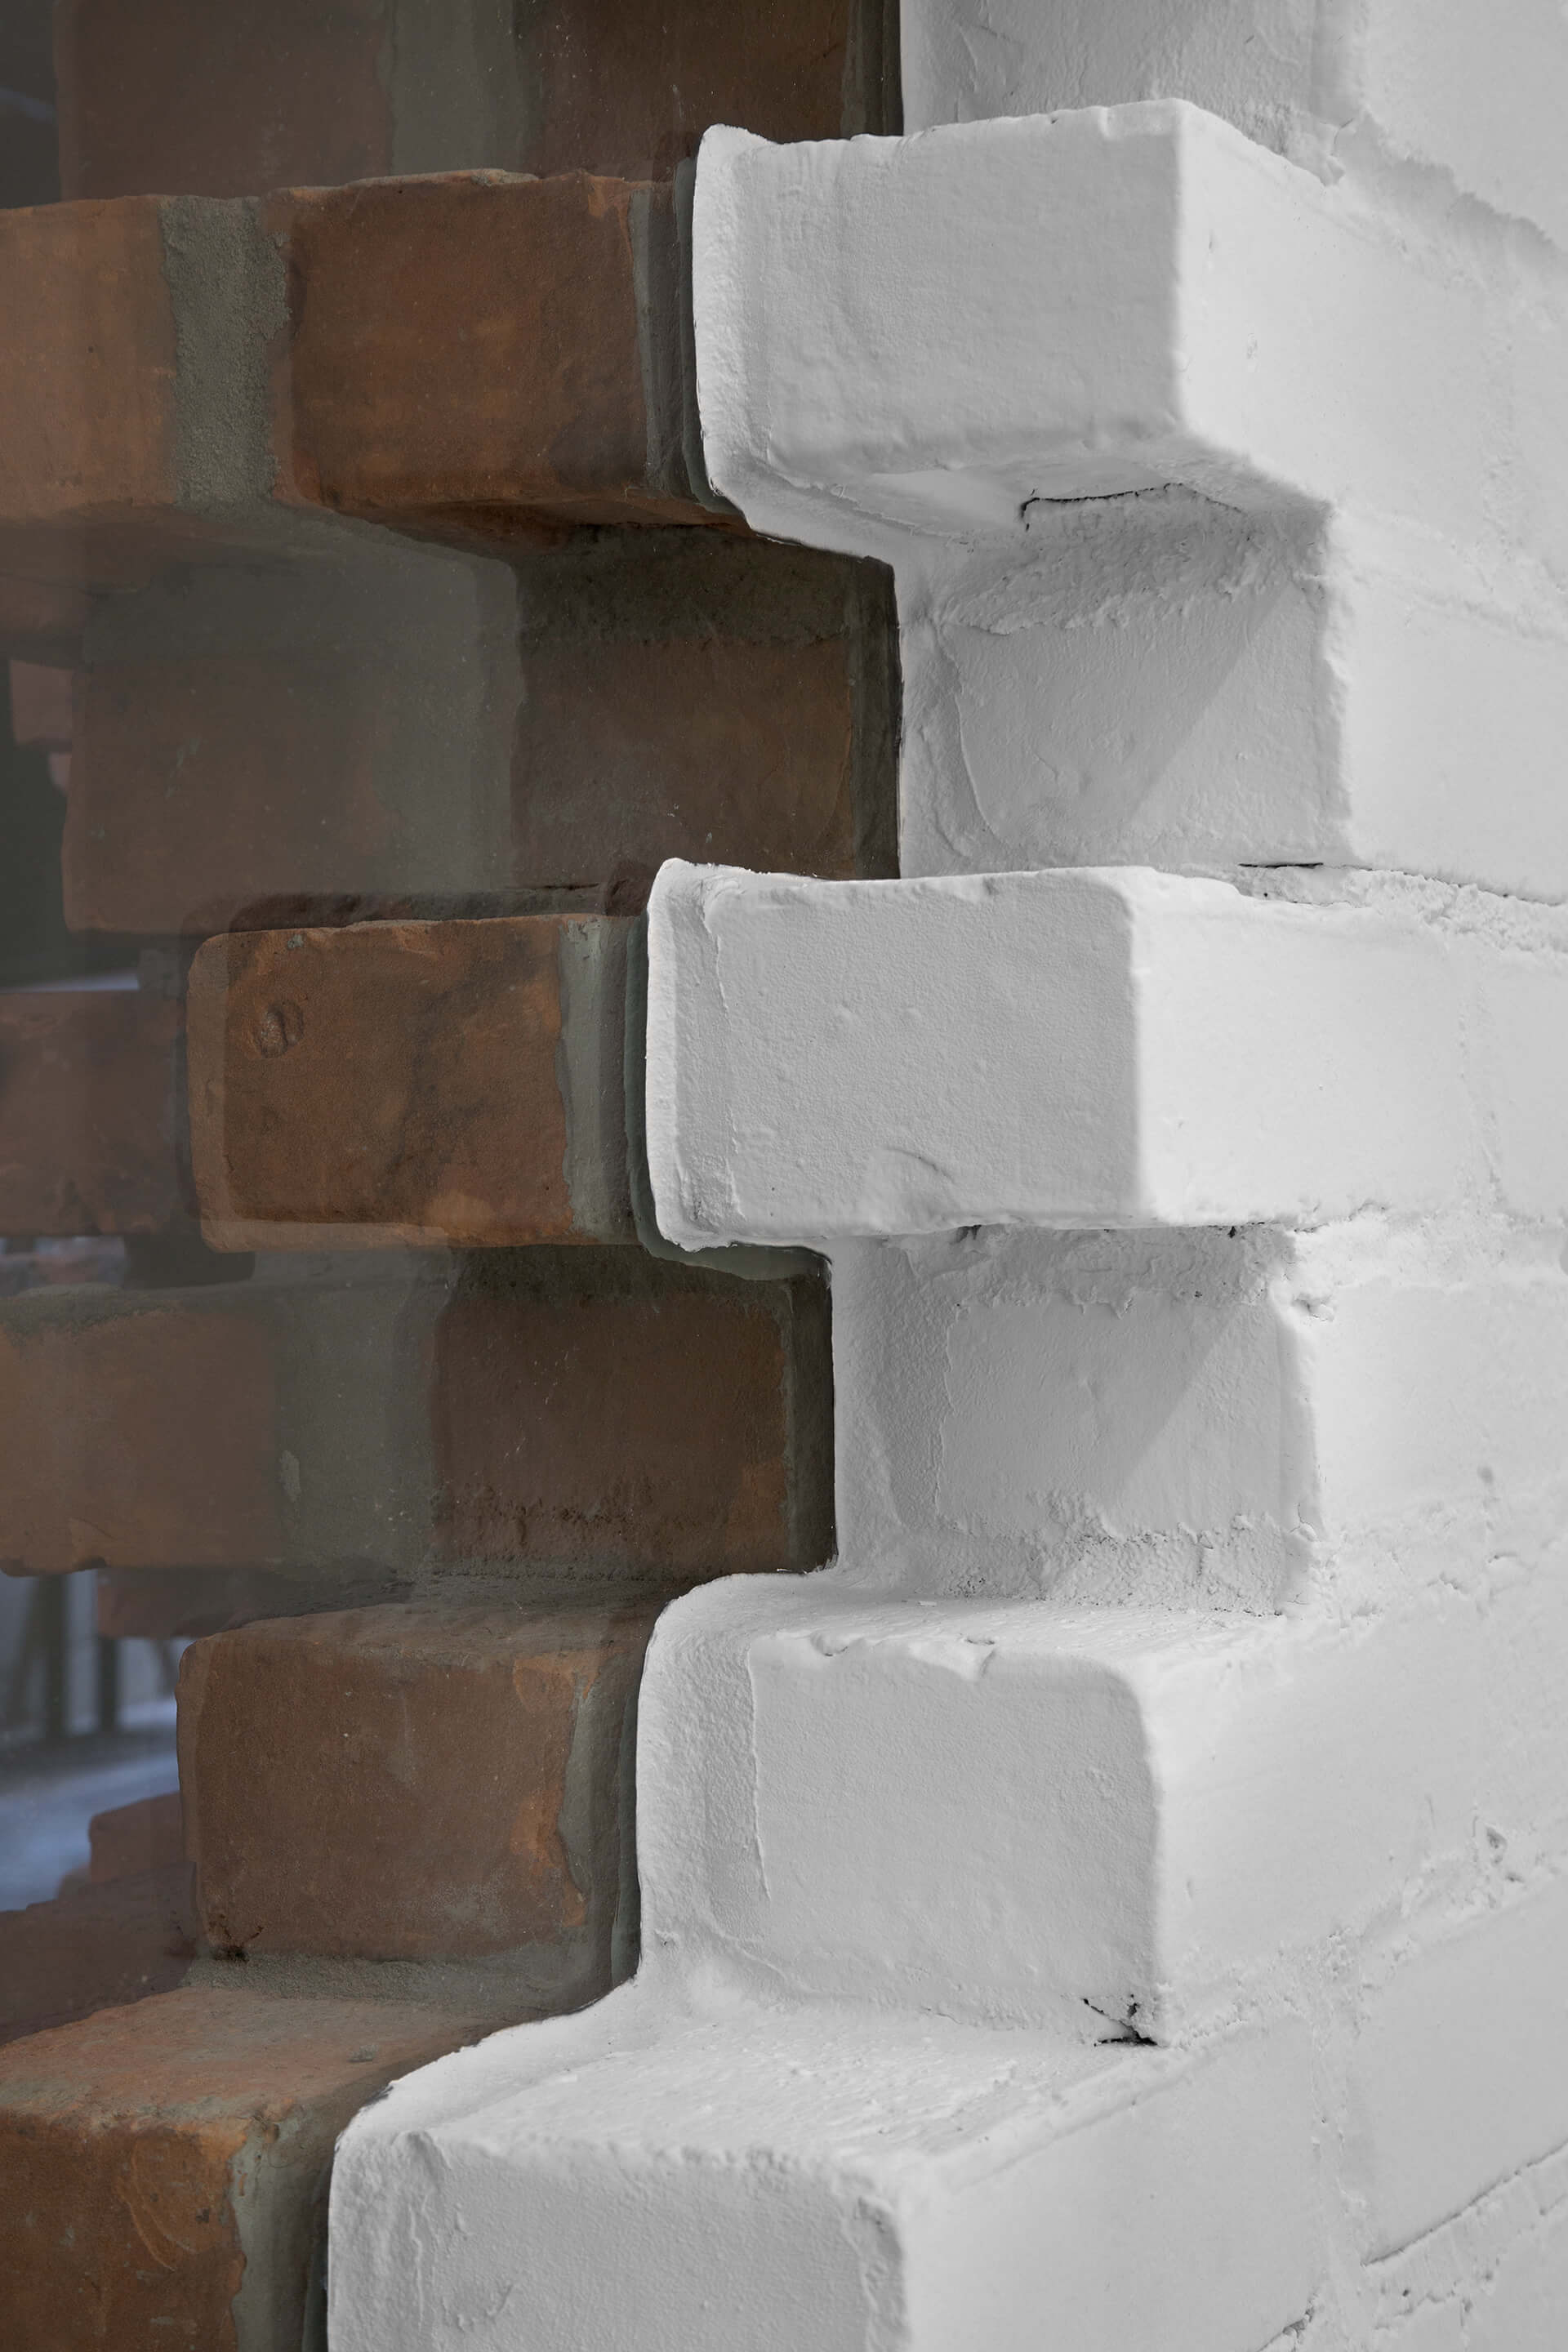 detail of a brick-based architectural intervention 